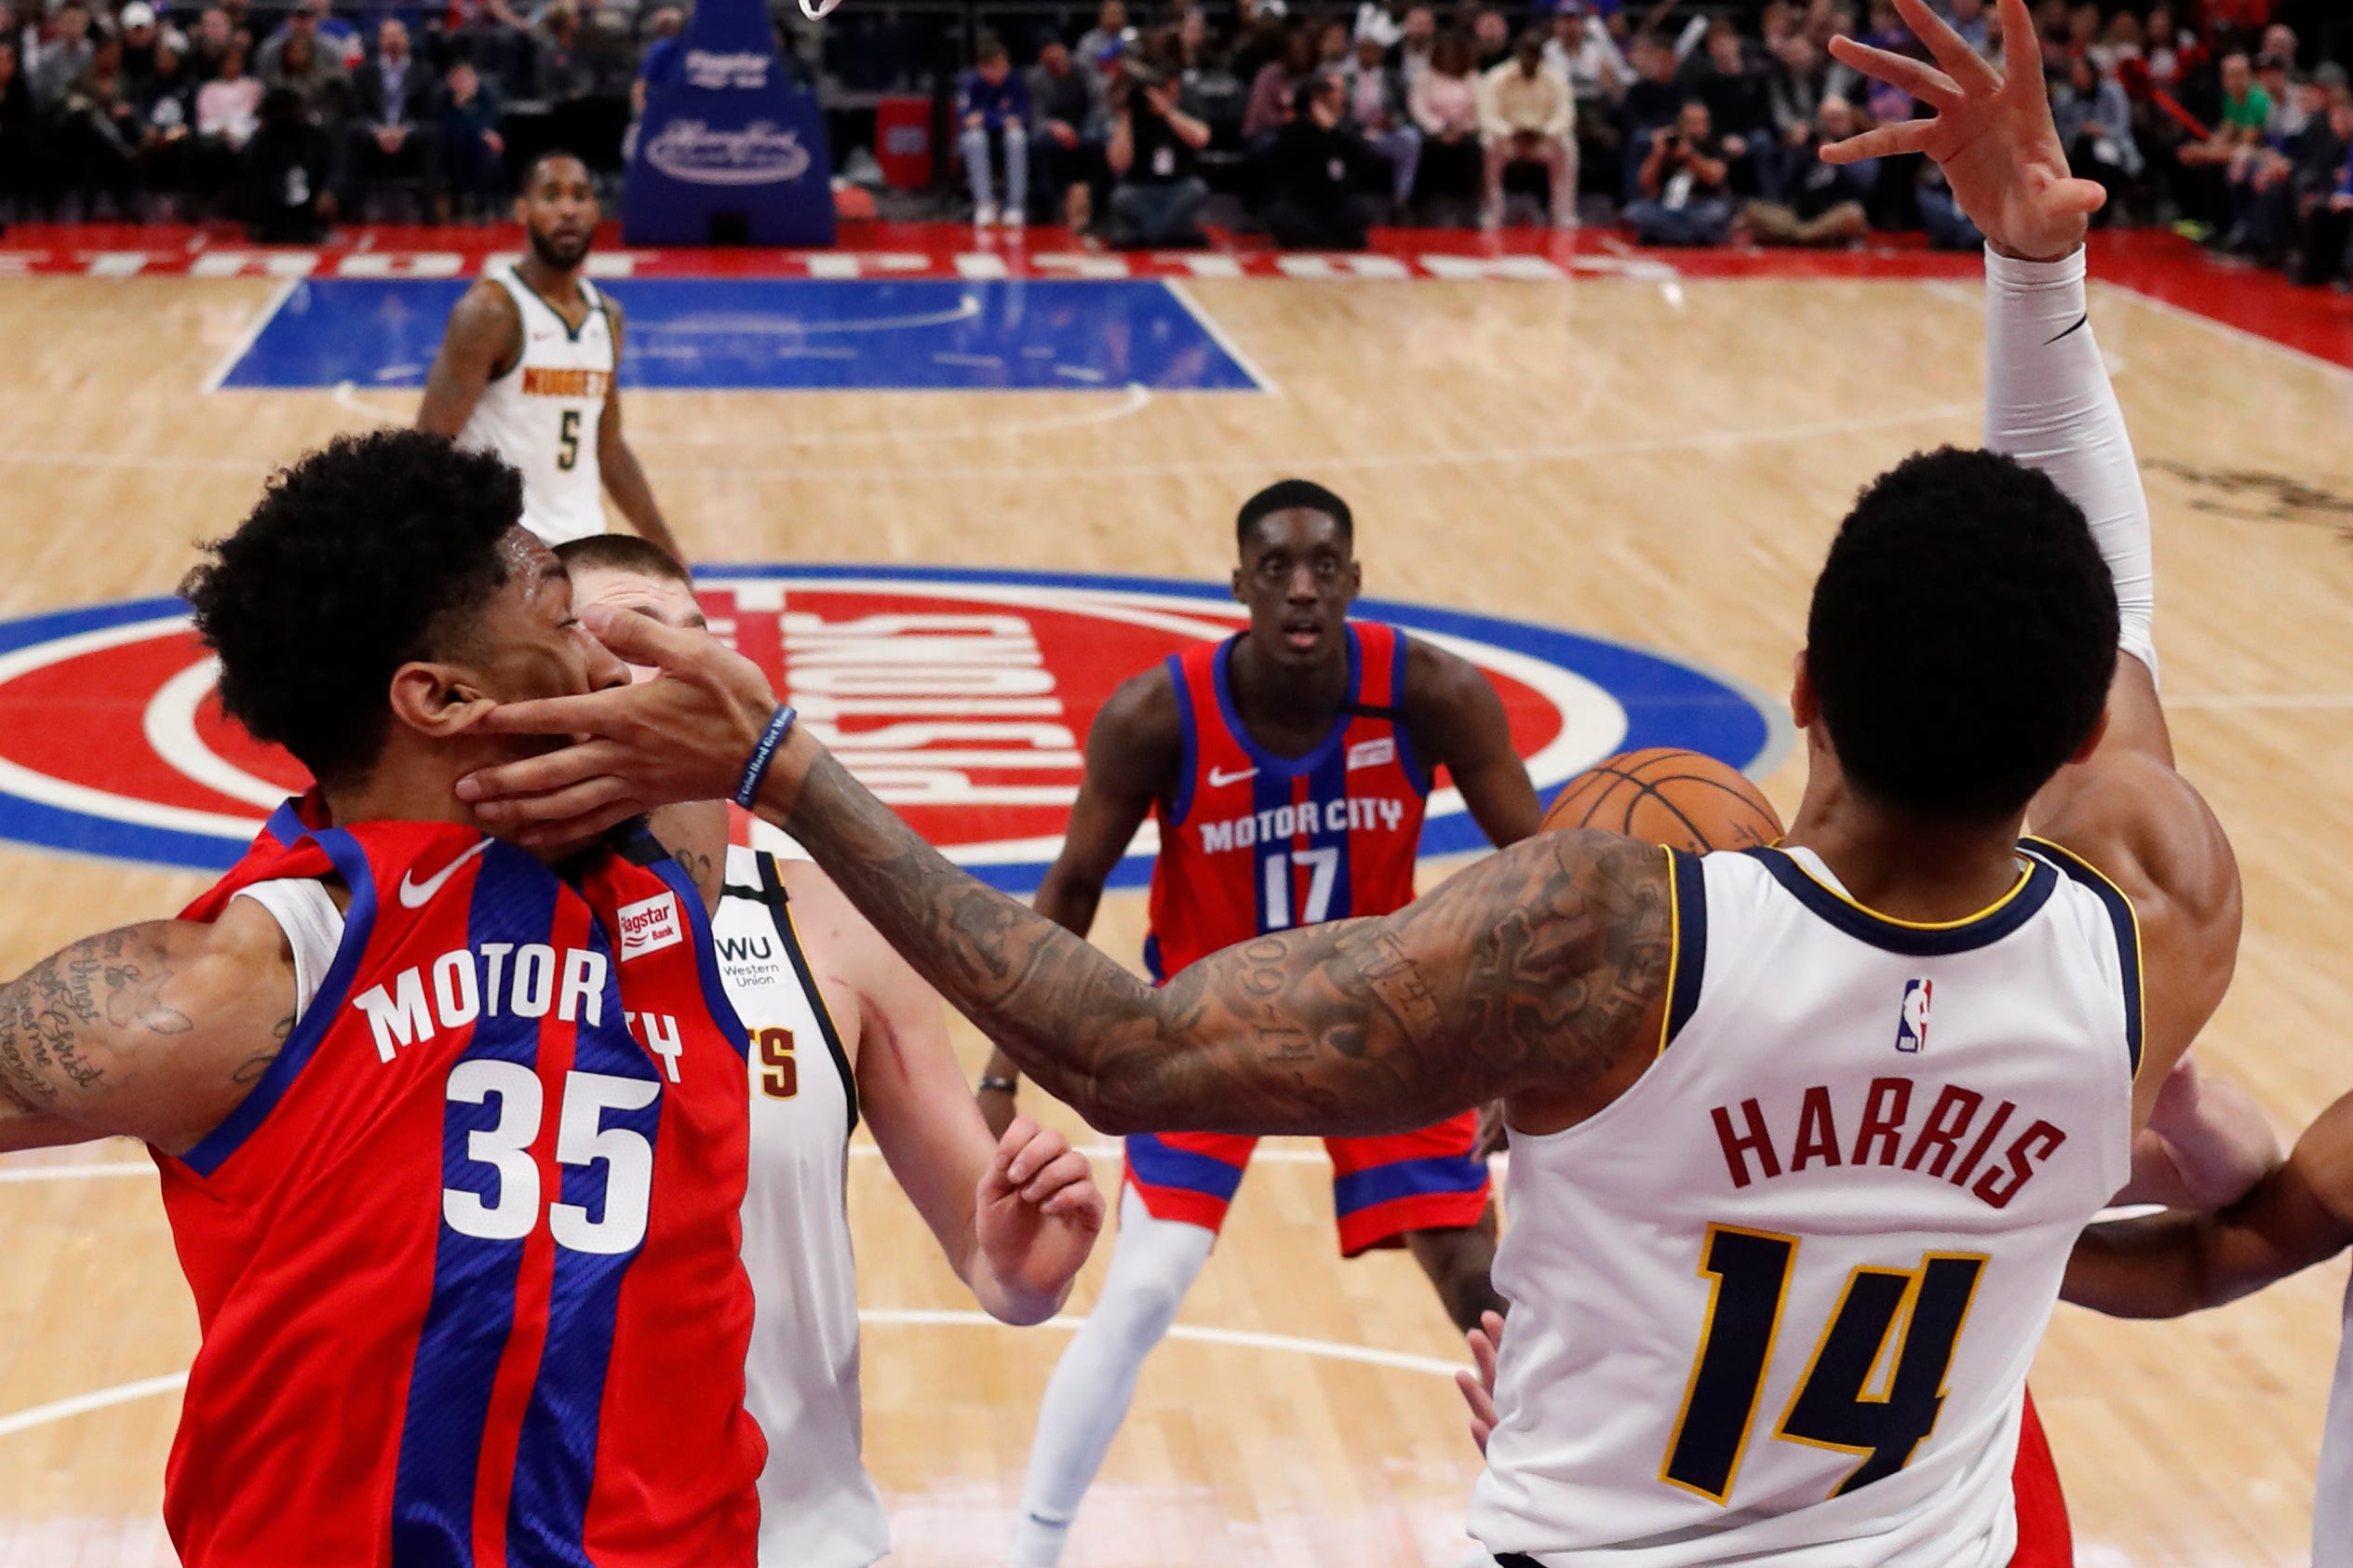 Denver Nuggets guard Gary Harris (14) looses control of the ball as hits Detroit Pistons forward Christian Wood (35) in the face during the second half.